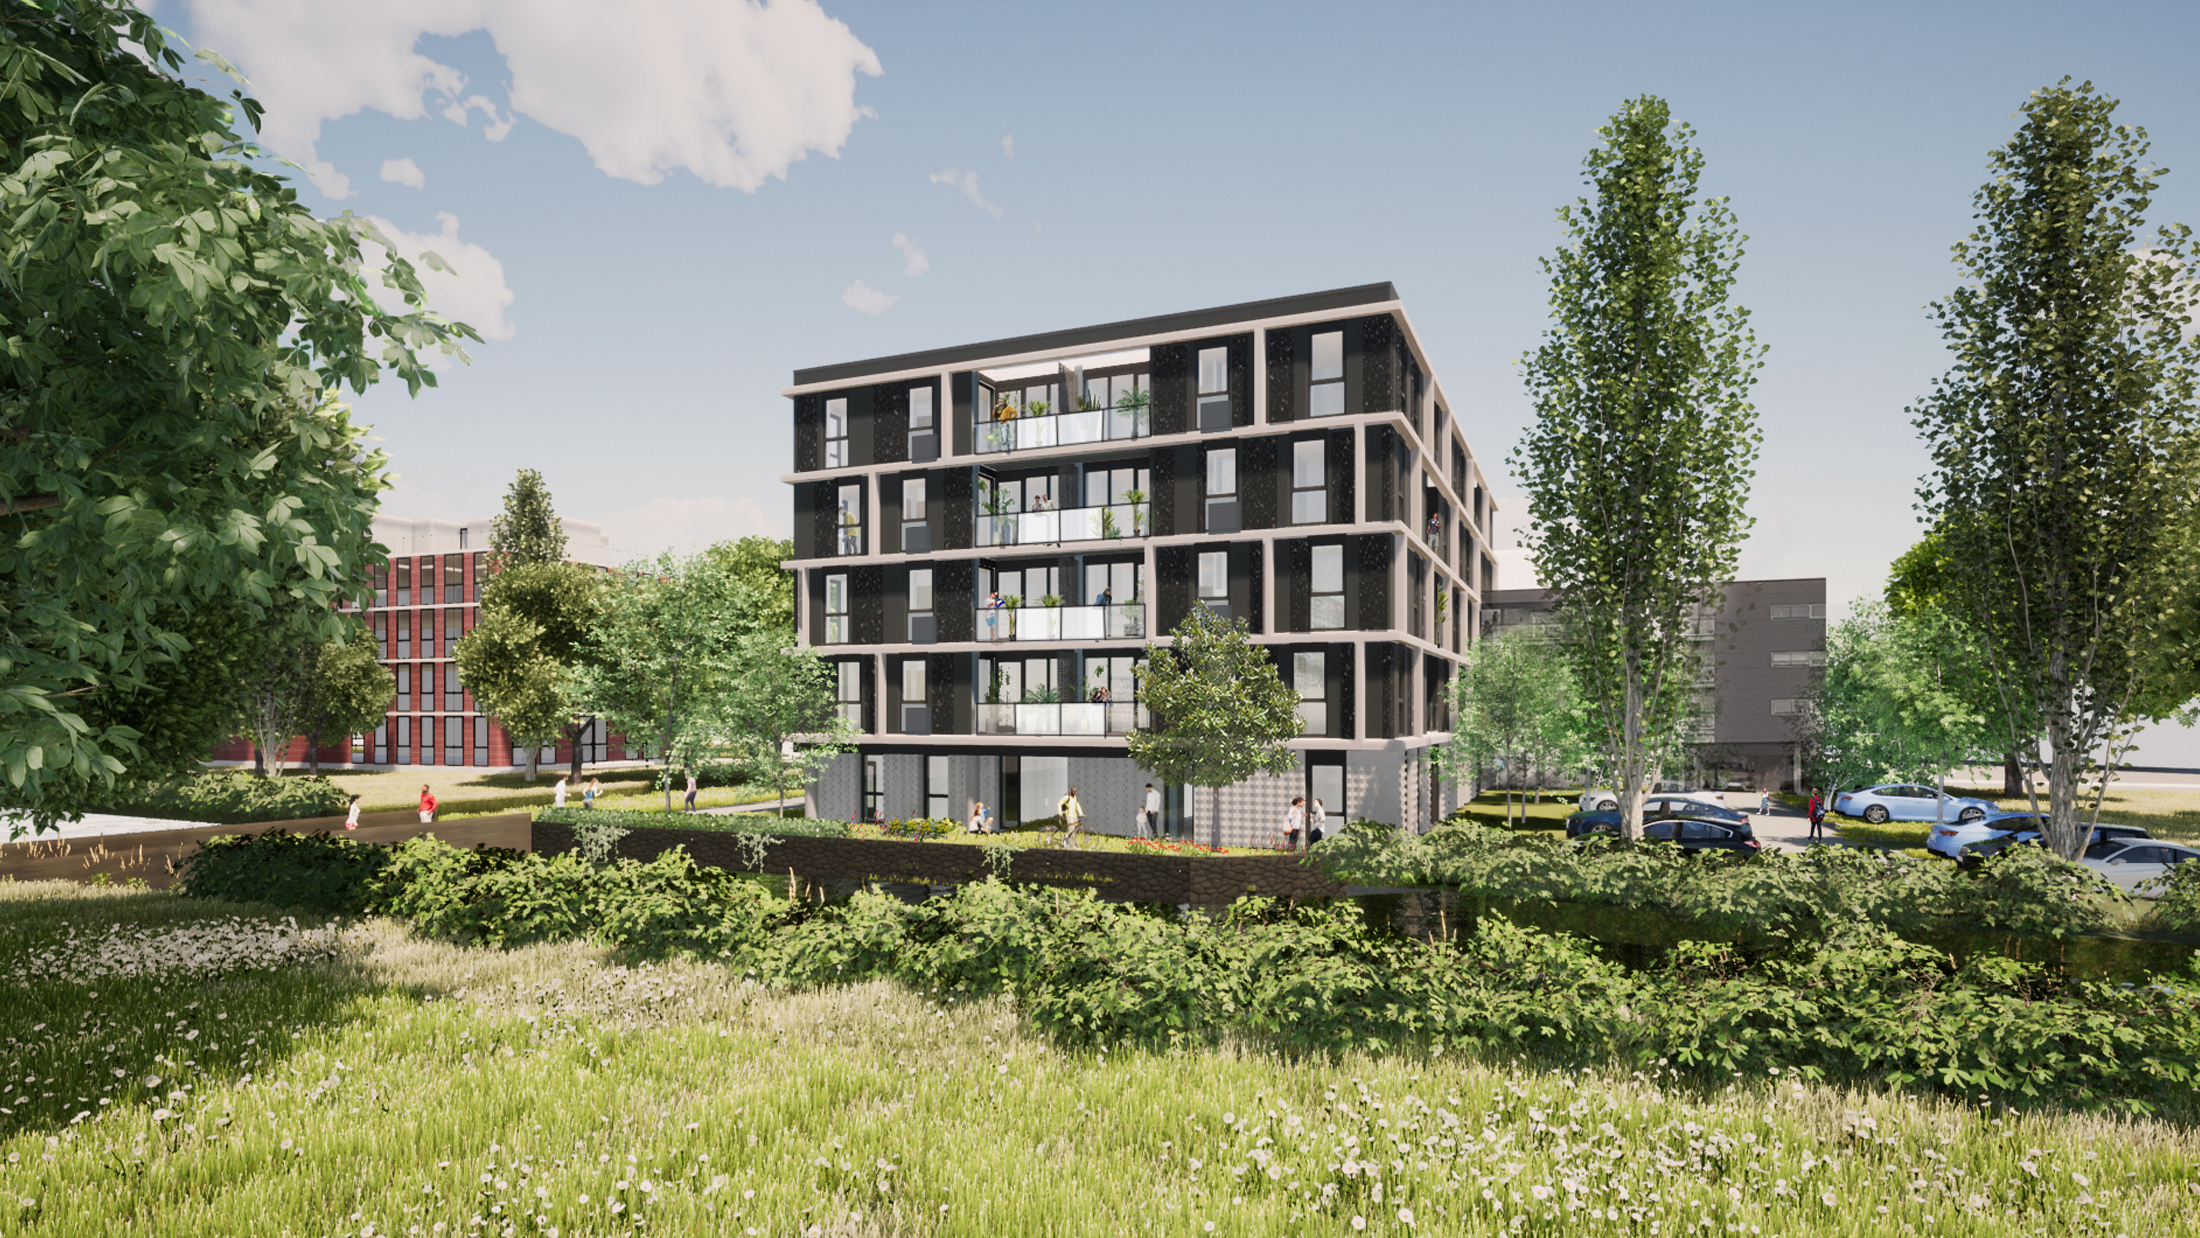 De Meker is a new residential building with 32 apartments in the social housing sector. It will be the last constructed block in the urban district Veerse Poort in Middelburg, and it is located on the border of the adjacent Nieuw Middelburg district. The unique position between the two districts adds to the spatial urban quality of the apartment block.